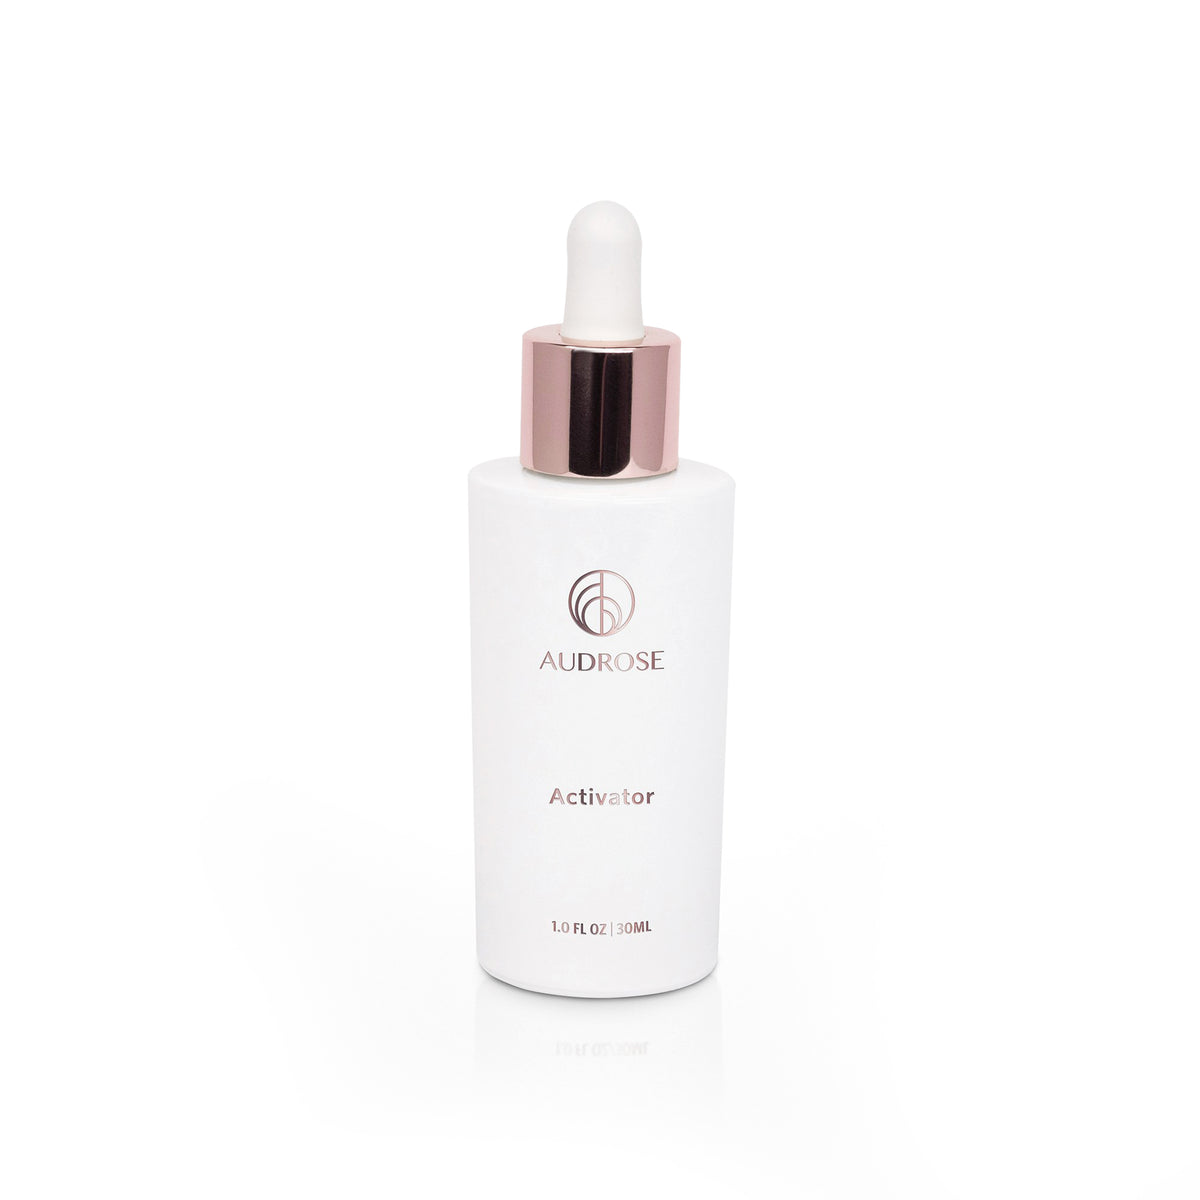 Audrose® Beauty Serum Activator | Face Audrose Hydrating